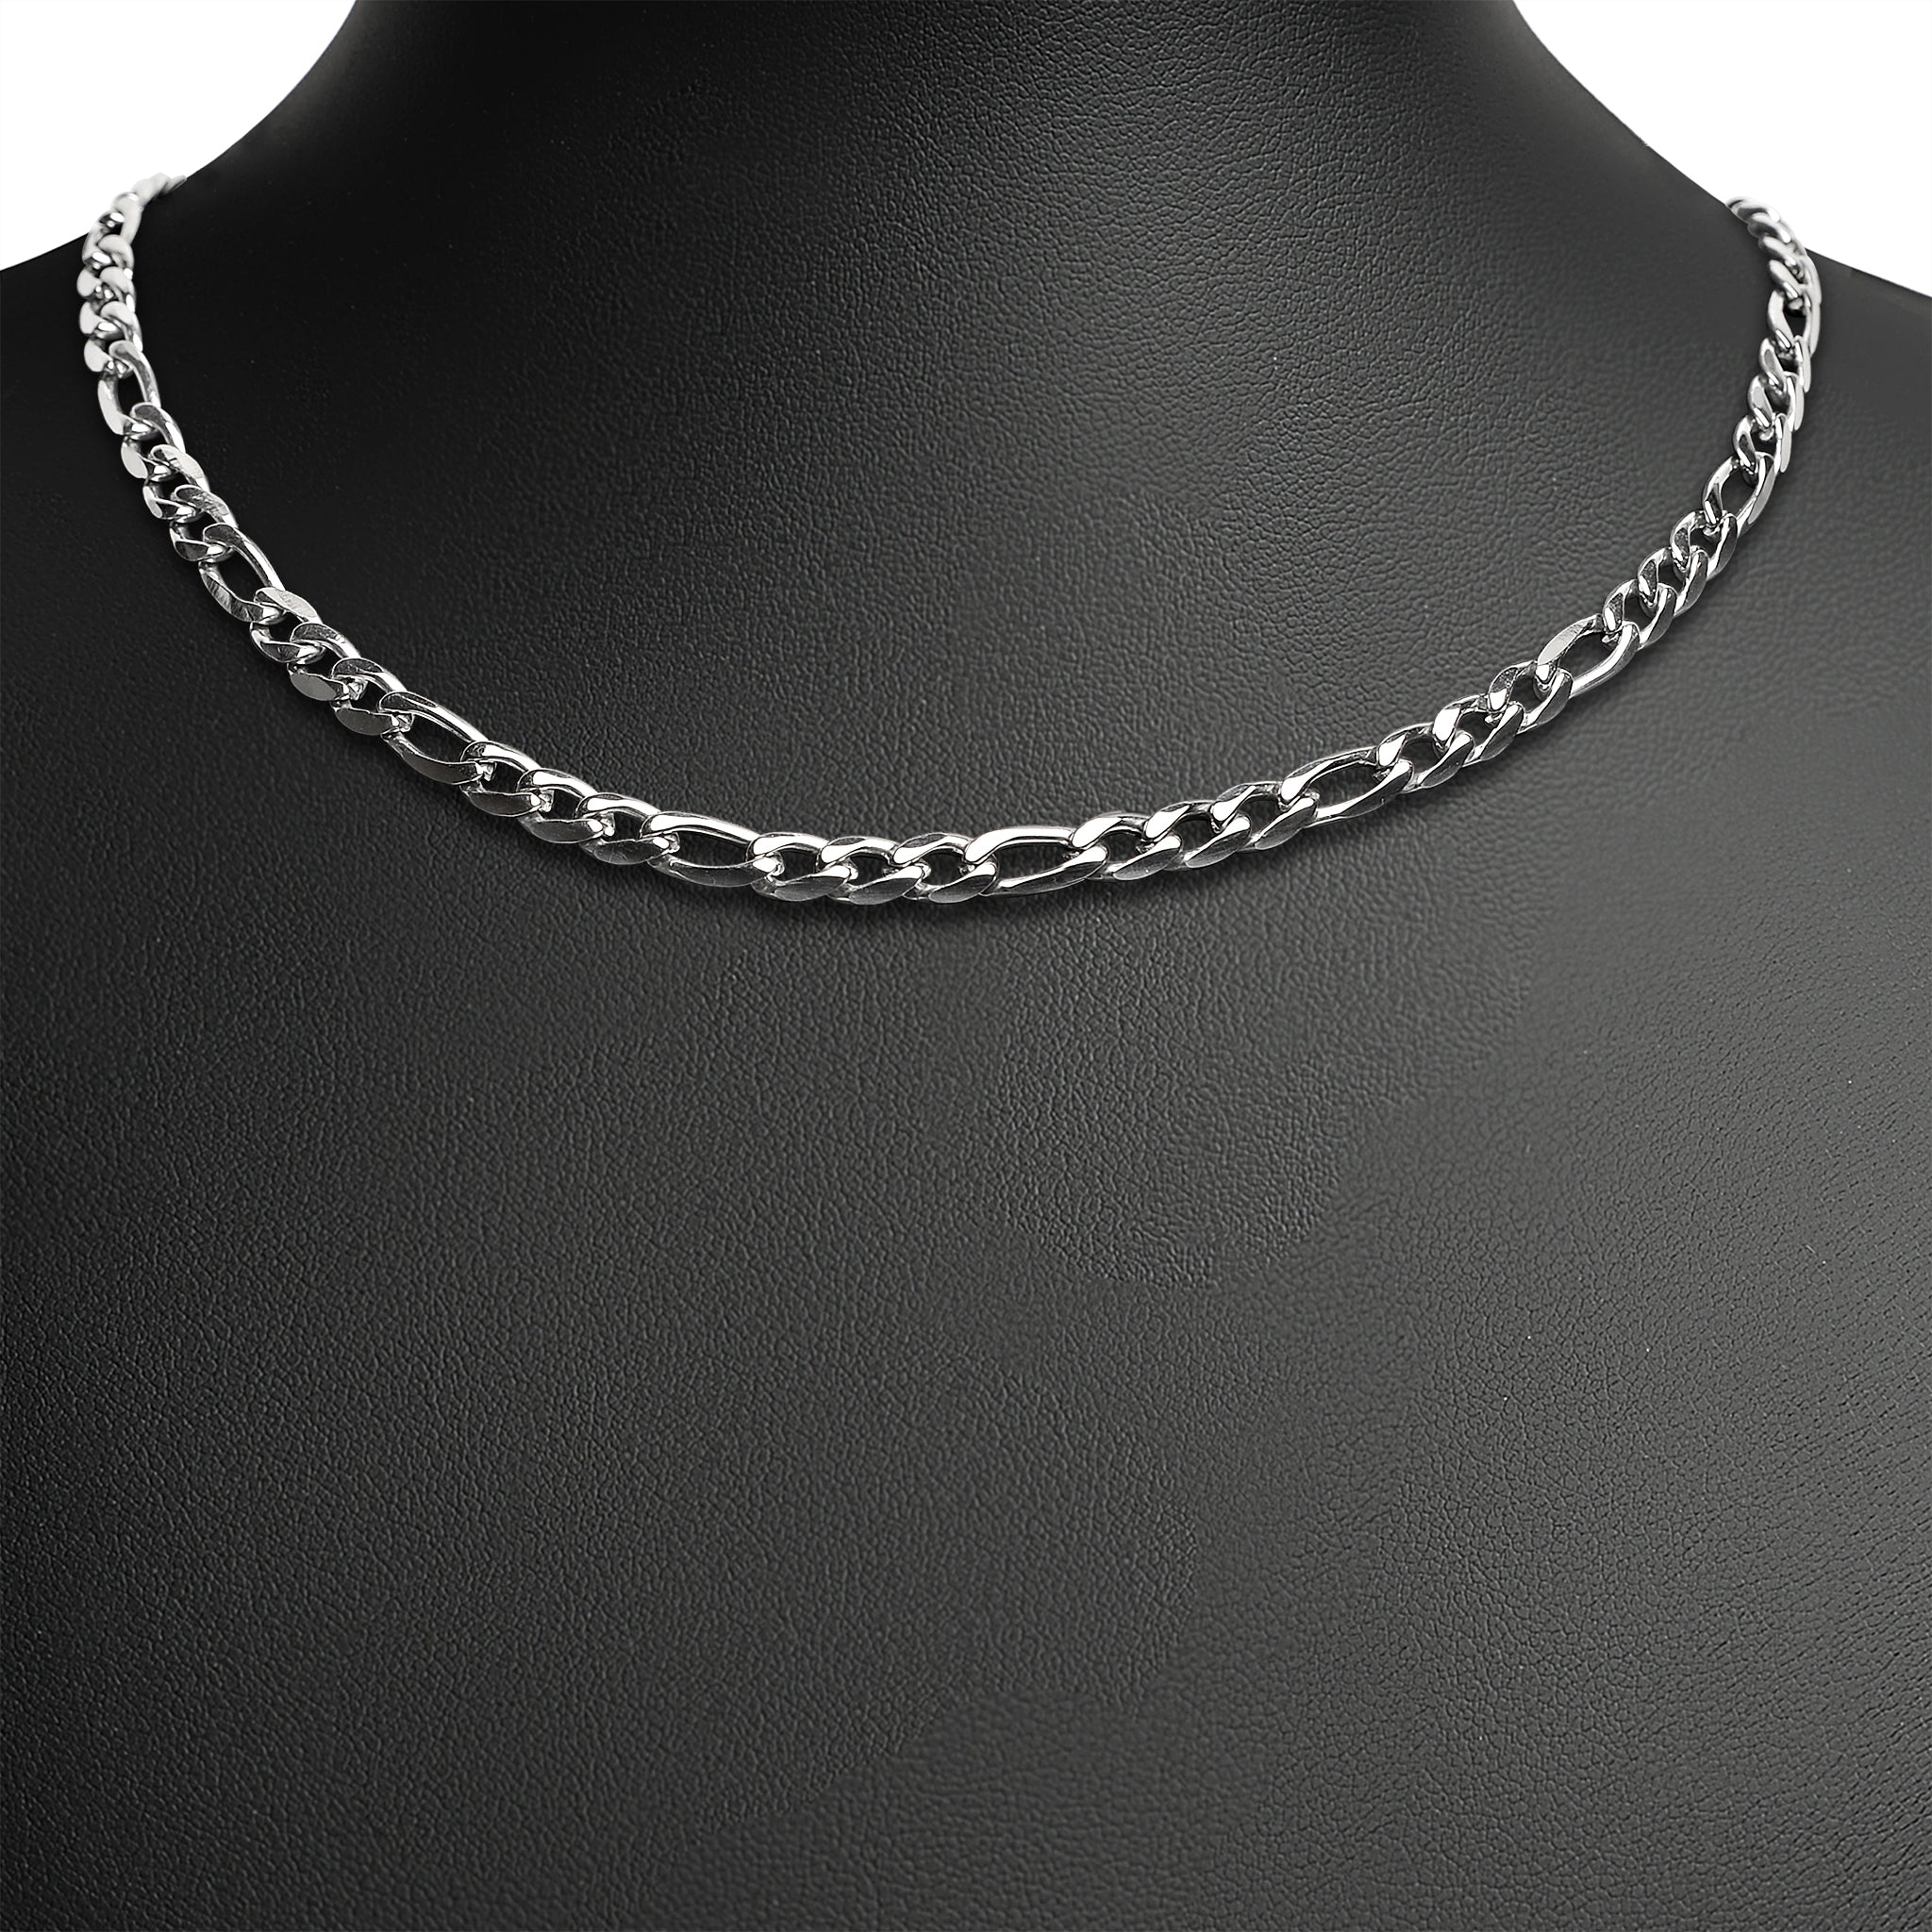 Stainless Steel Figaro Chain Necklace - Timeless Design, Hypoallergenic, Rust-Proof - 8g, 12mm-9mm - Online Store - Jewelry & Watches - Bijou Her -  -  - 